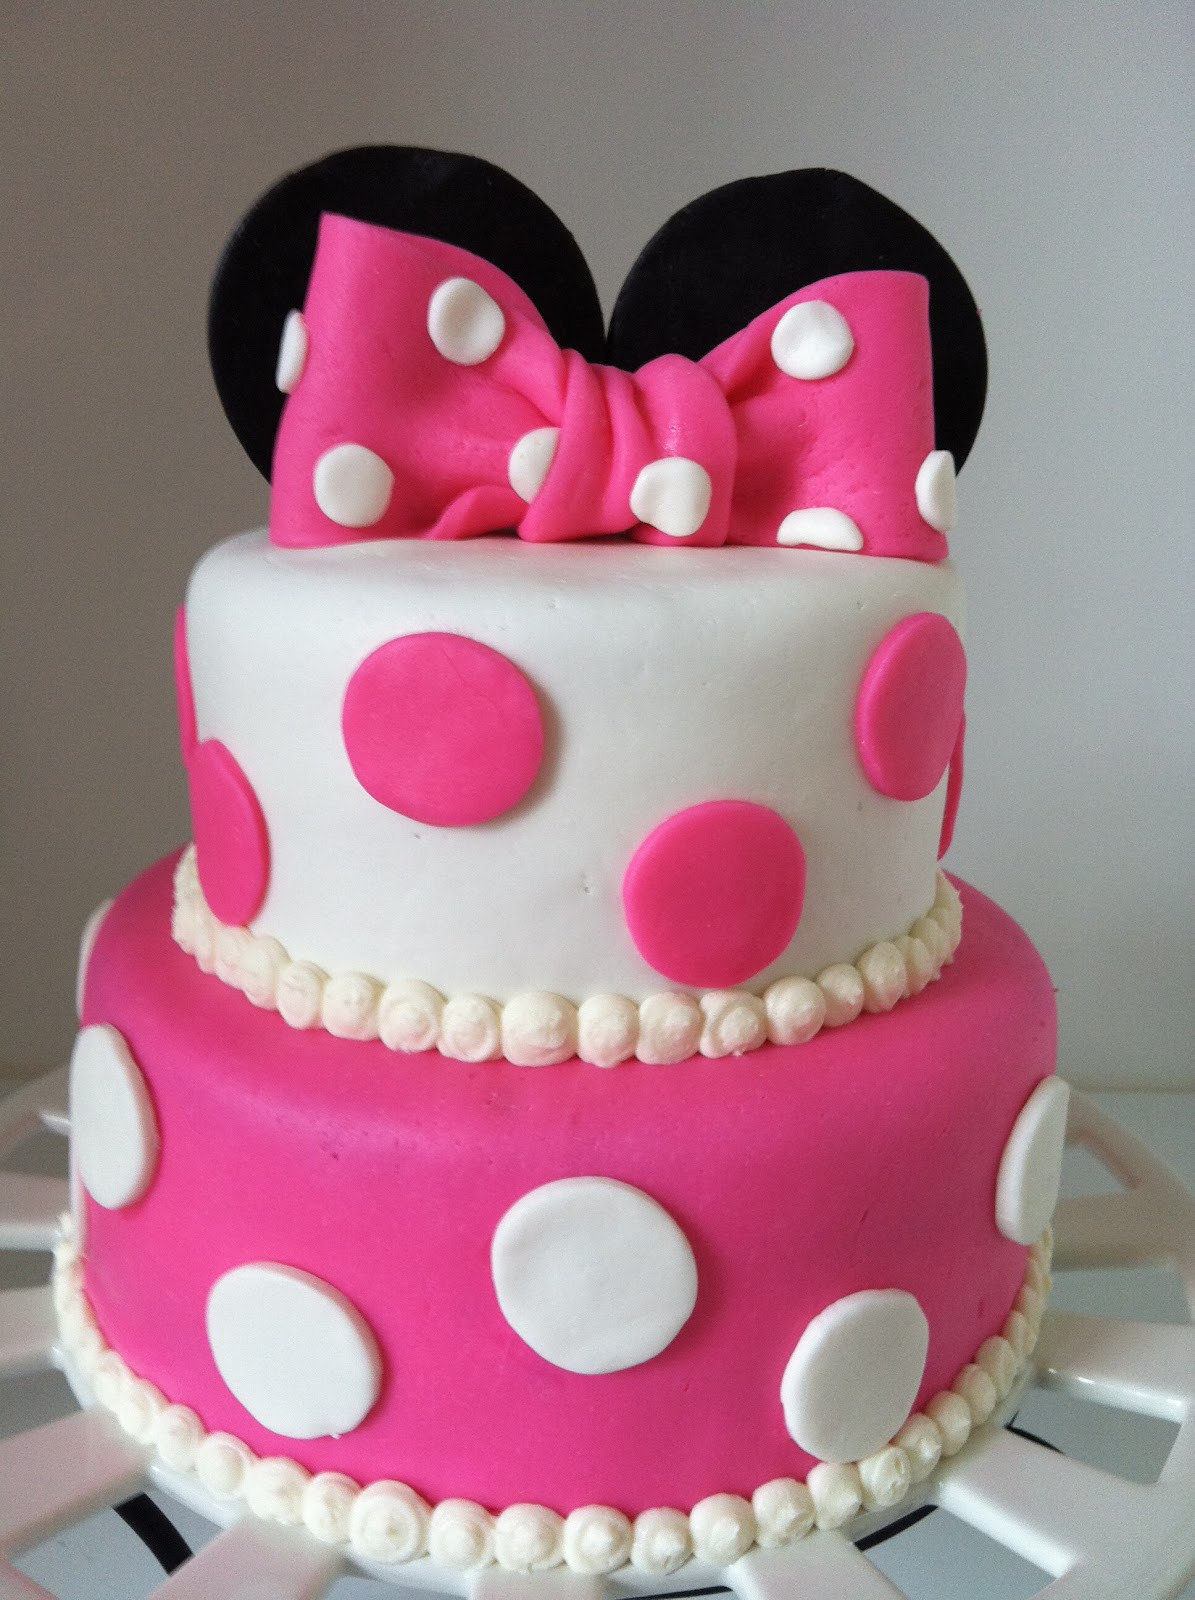 Baby Girl Birthday Cakes
 Birthday Cakes for Girls Make Surprise with Adorable Design